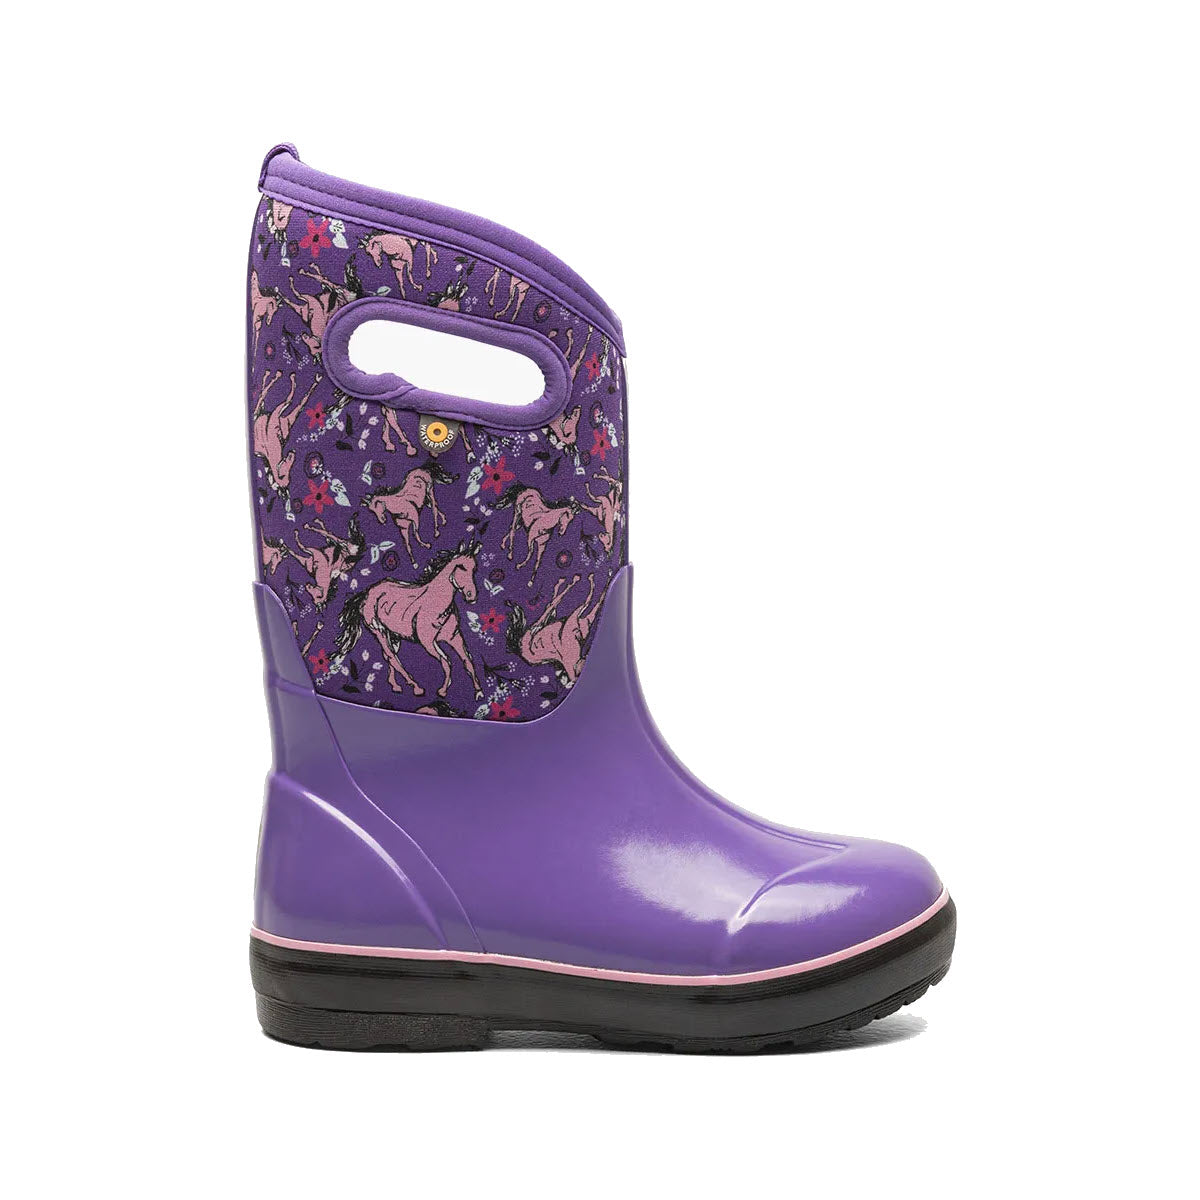 BOGS CLASSIC II UNICORN AWESOME VIOLET - KIDS